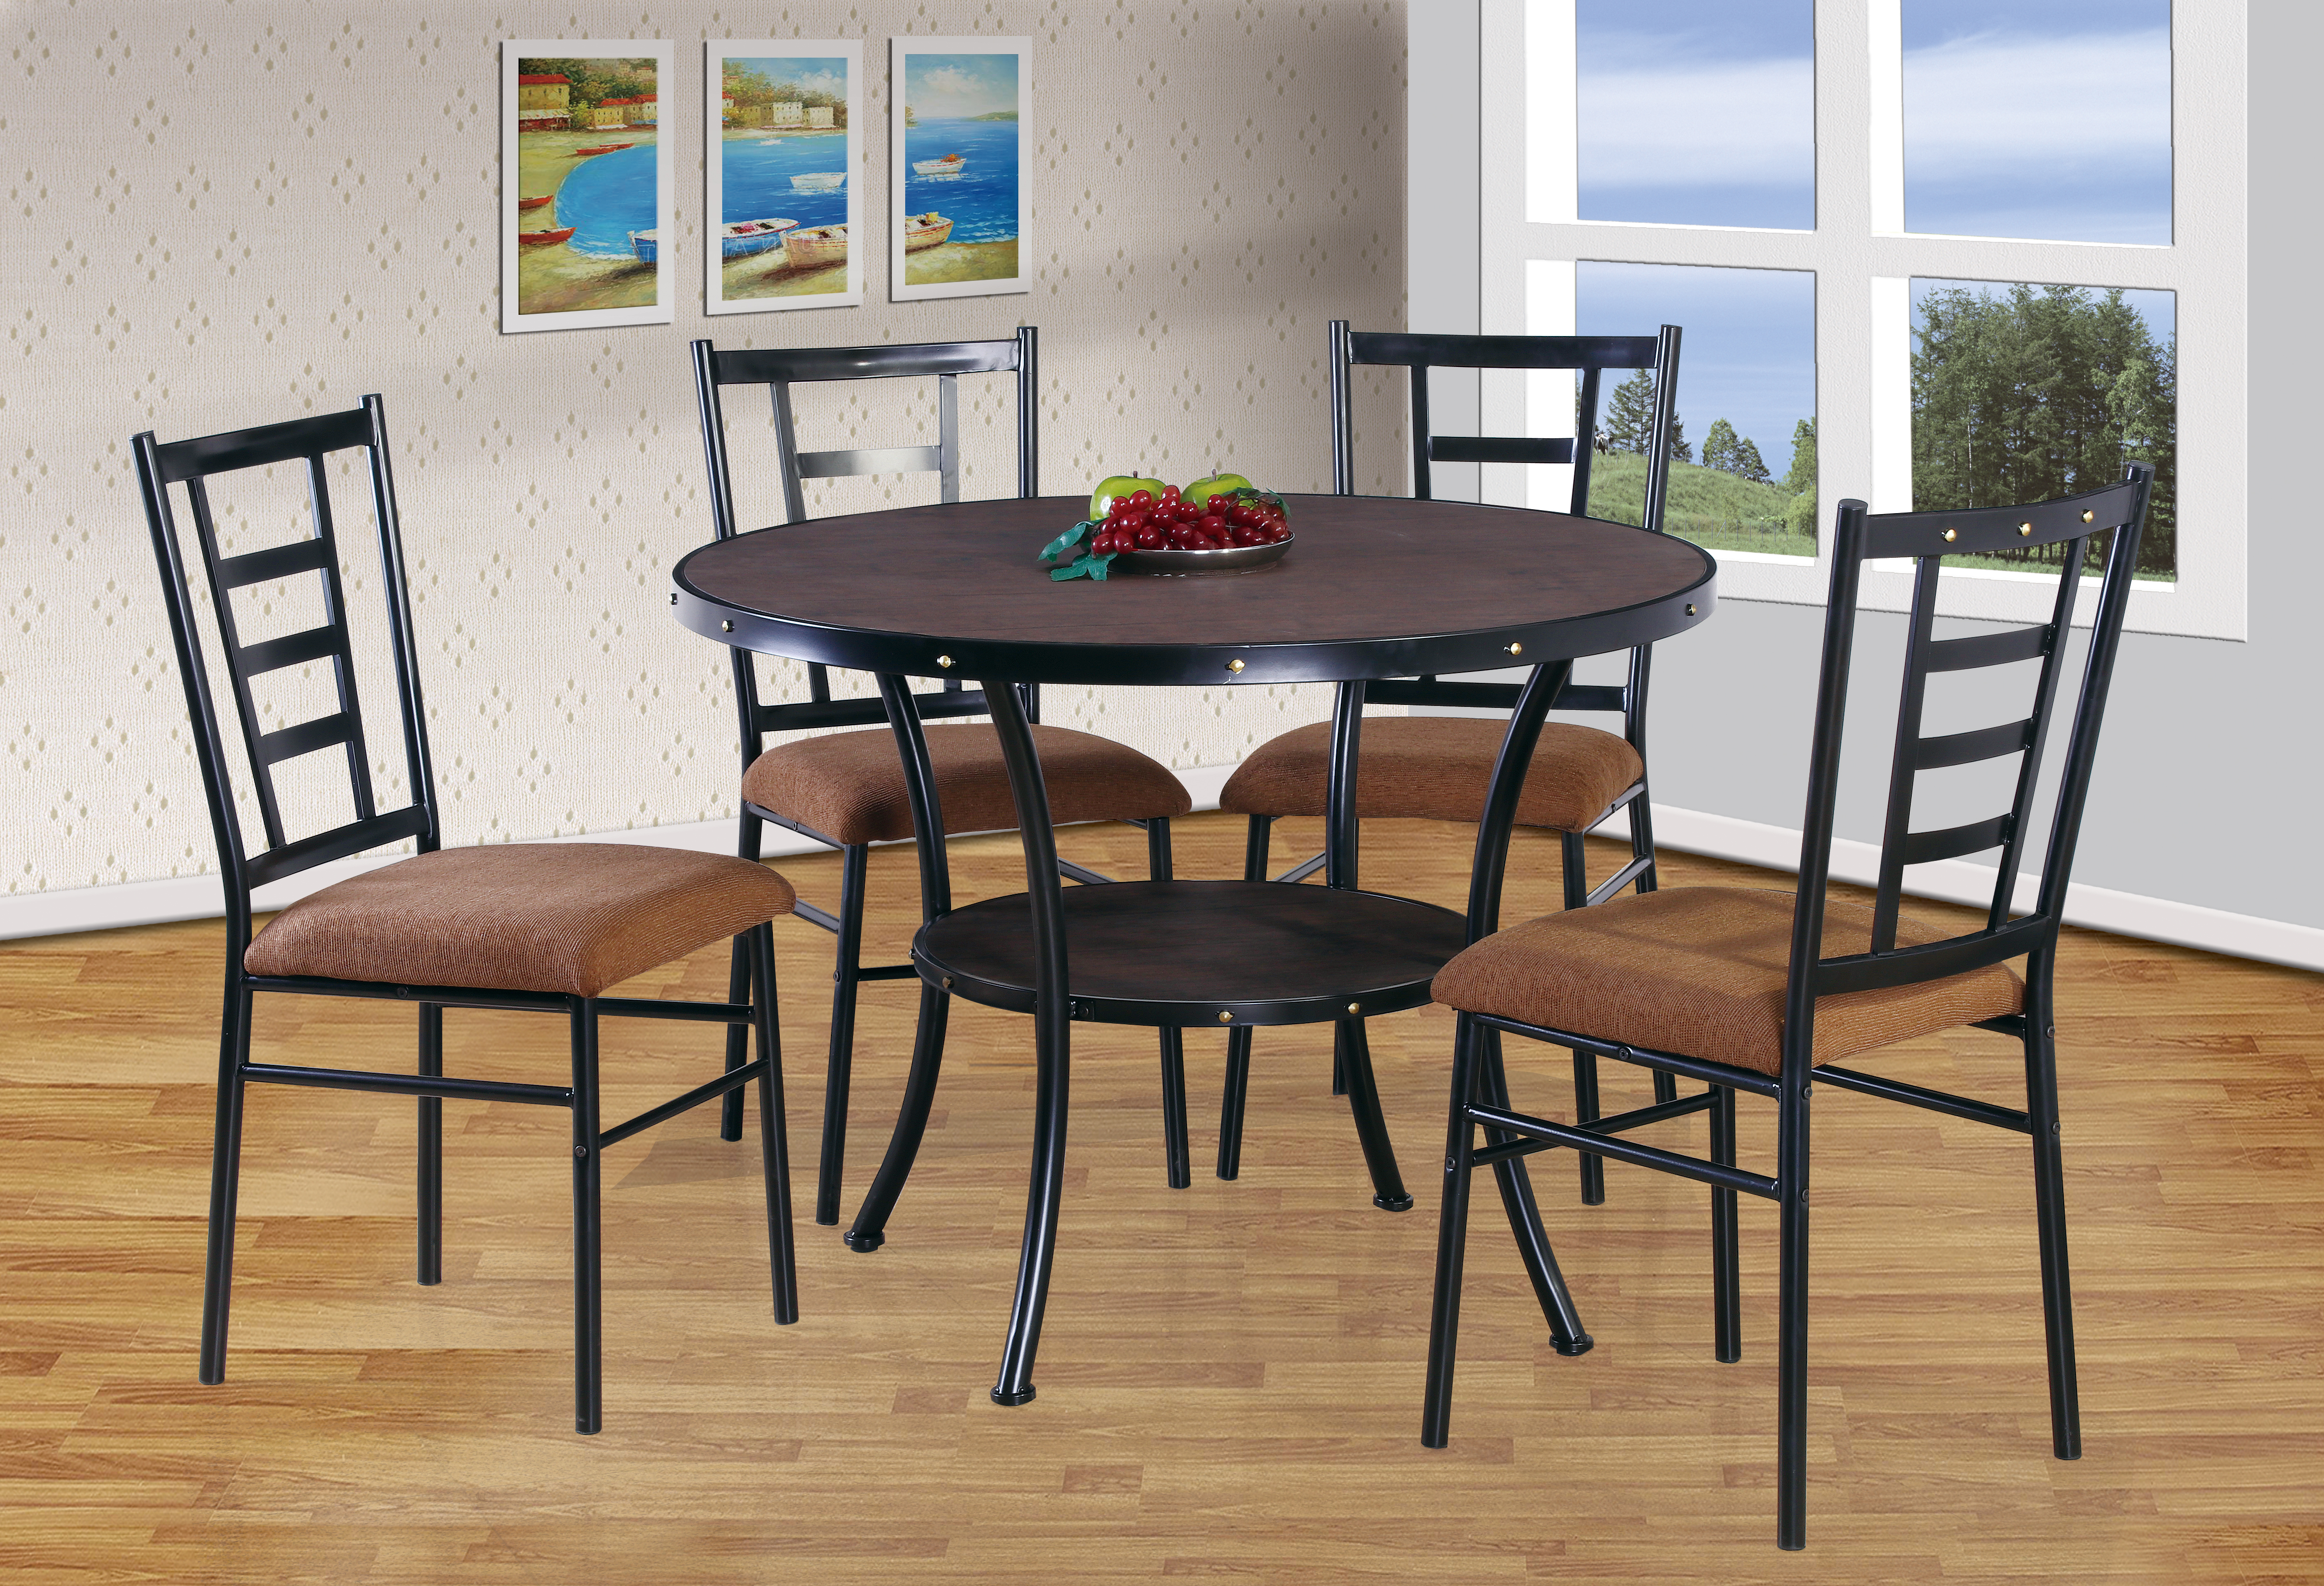 5pc round dining table-GS-5114 Featured Image